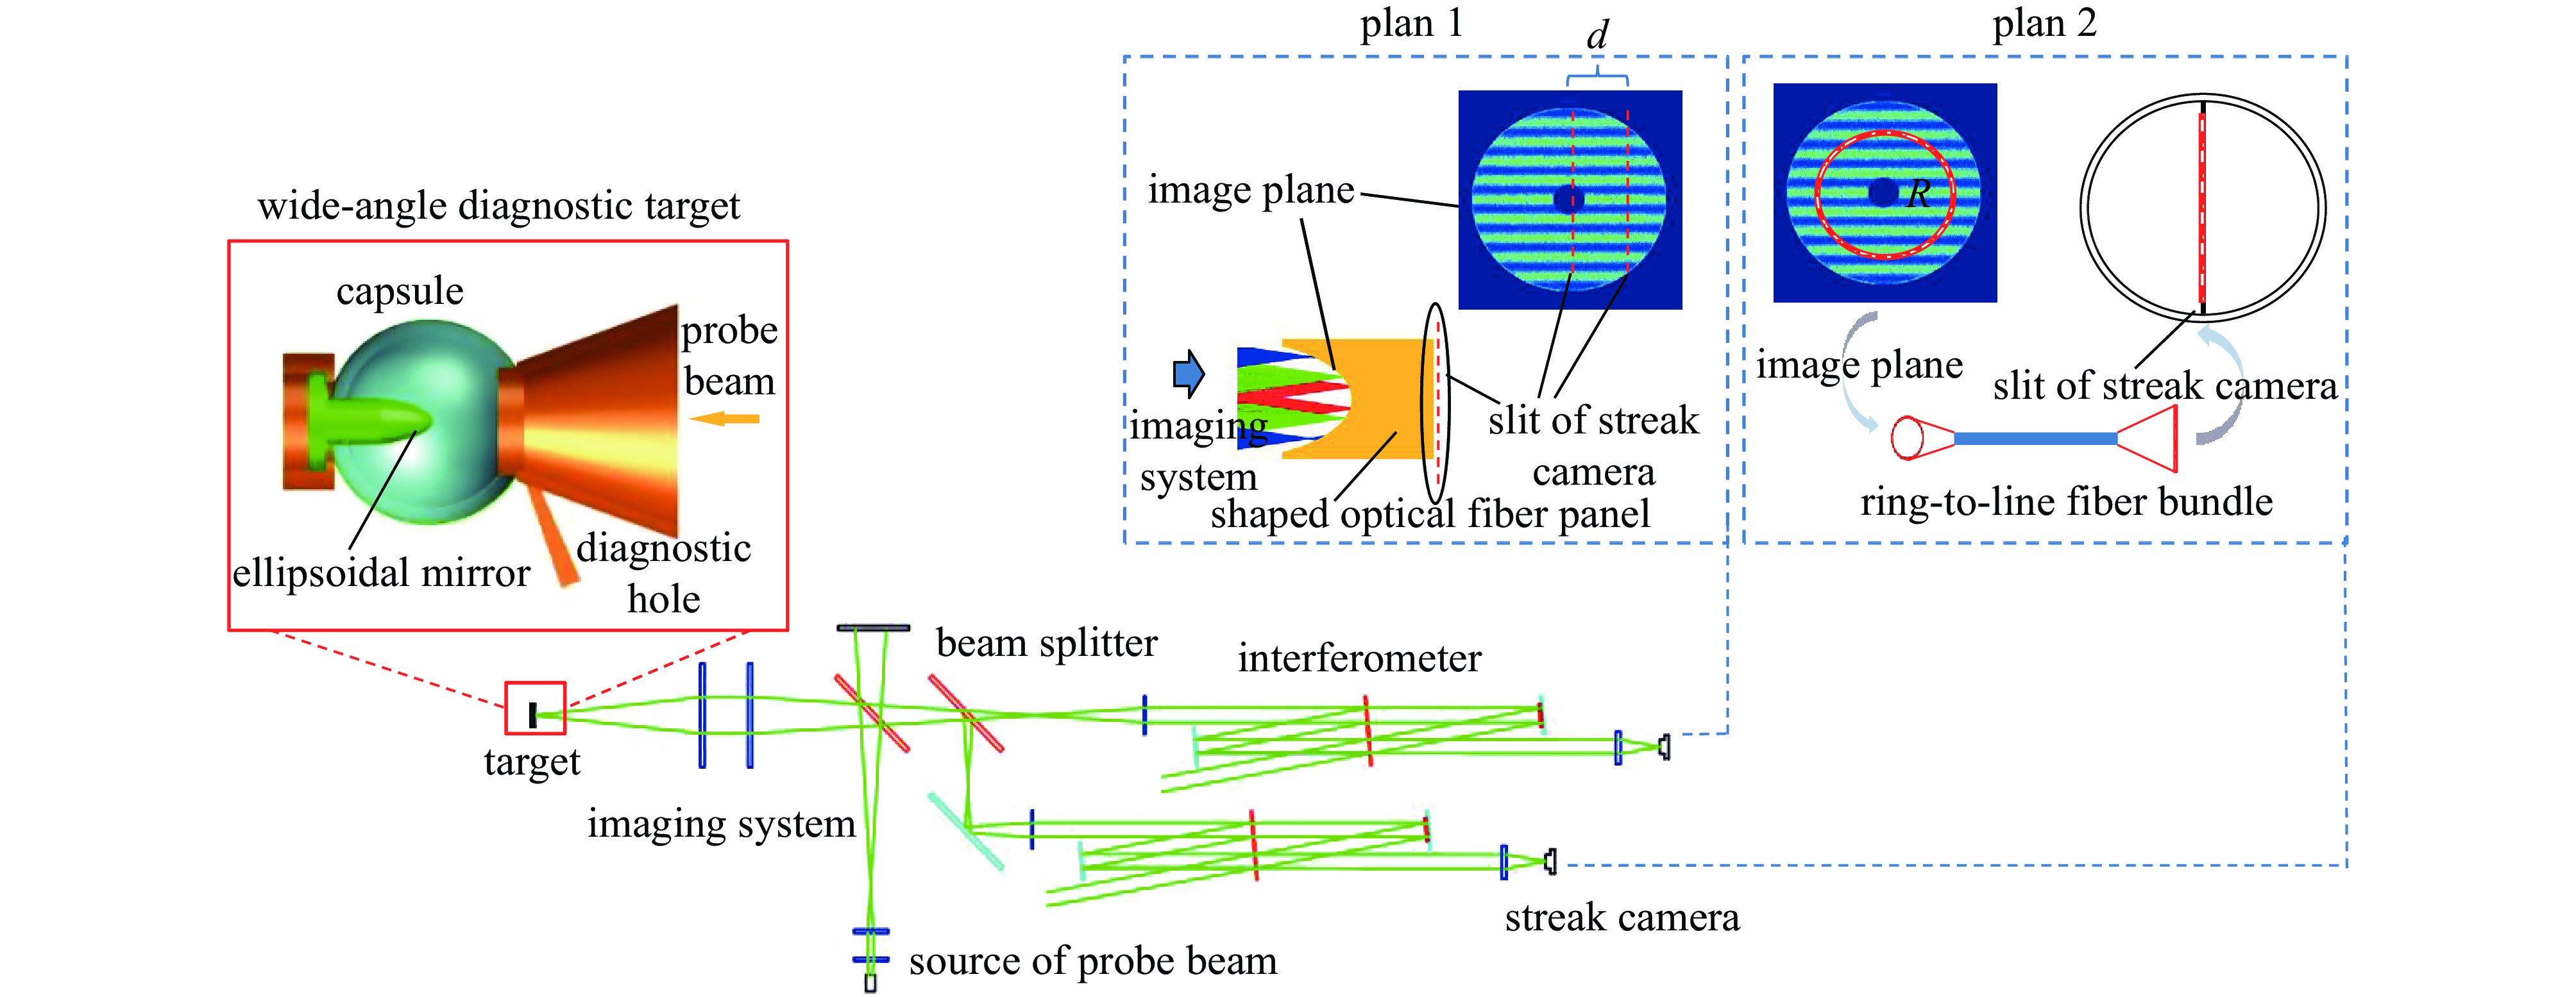 Implosion symmetry diagnosis design based on wide-angle VISAR